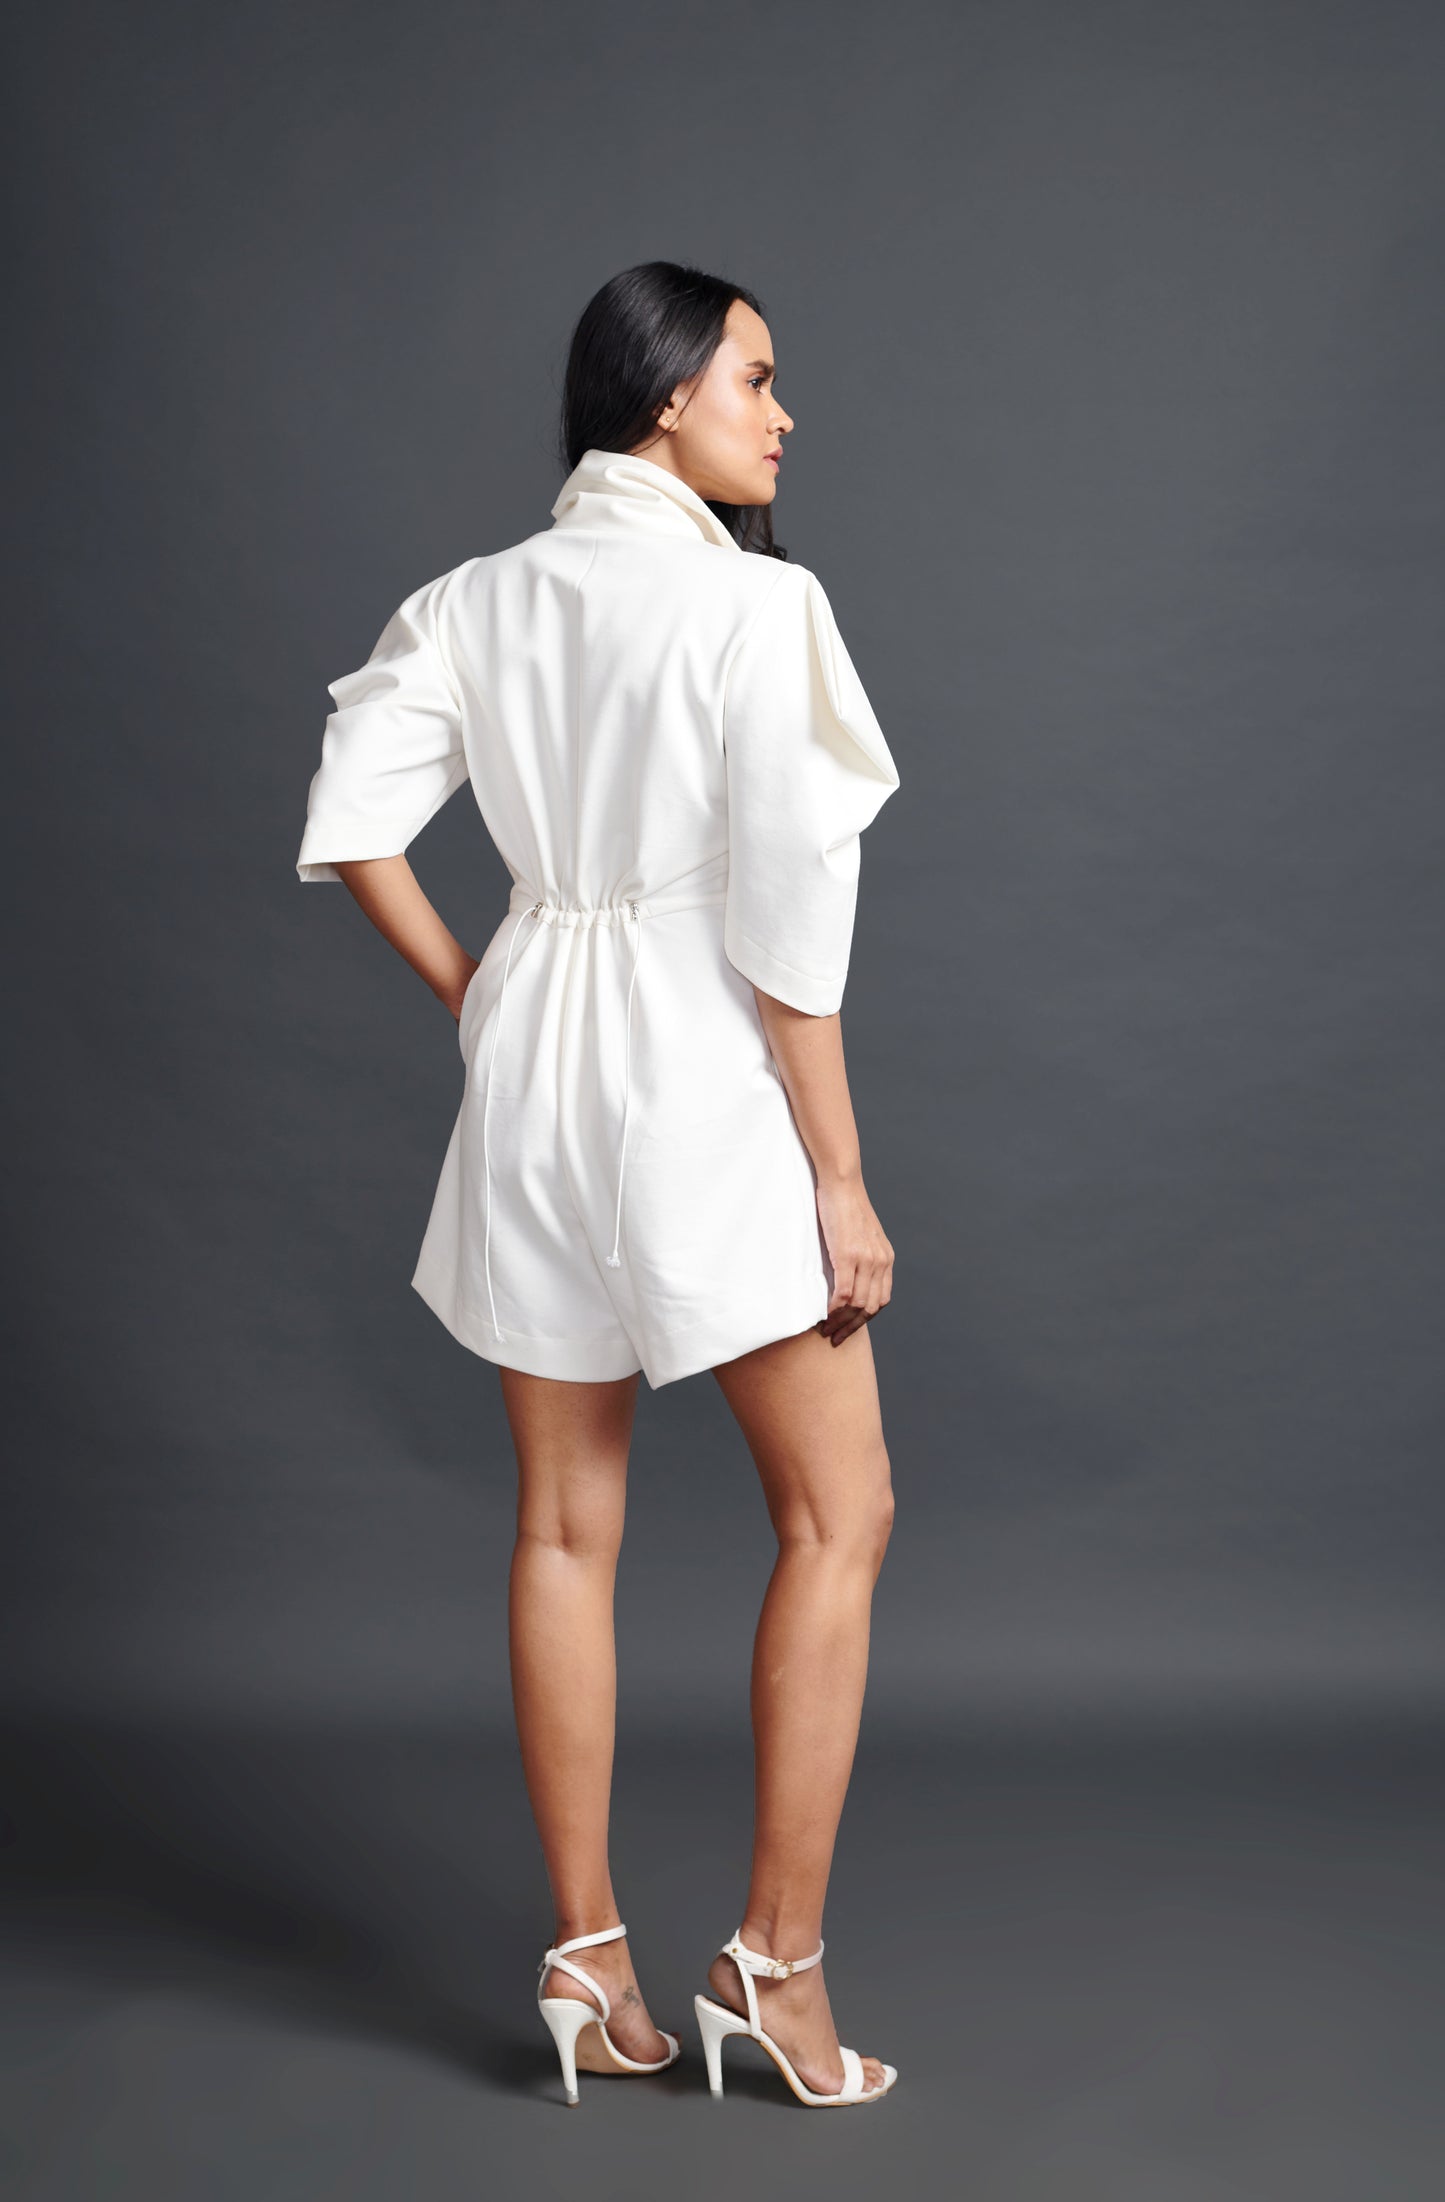 Image of WHITE HIGH NECK PLAYSUIT WITH CUT WORK NEON BUTTONS. From savoirfashions.com